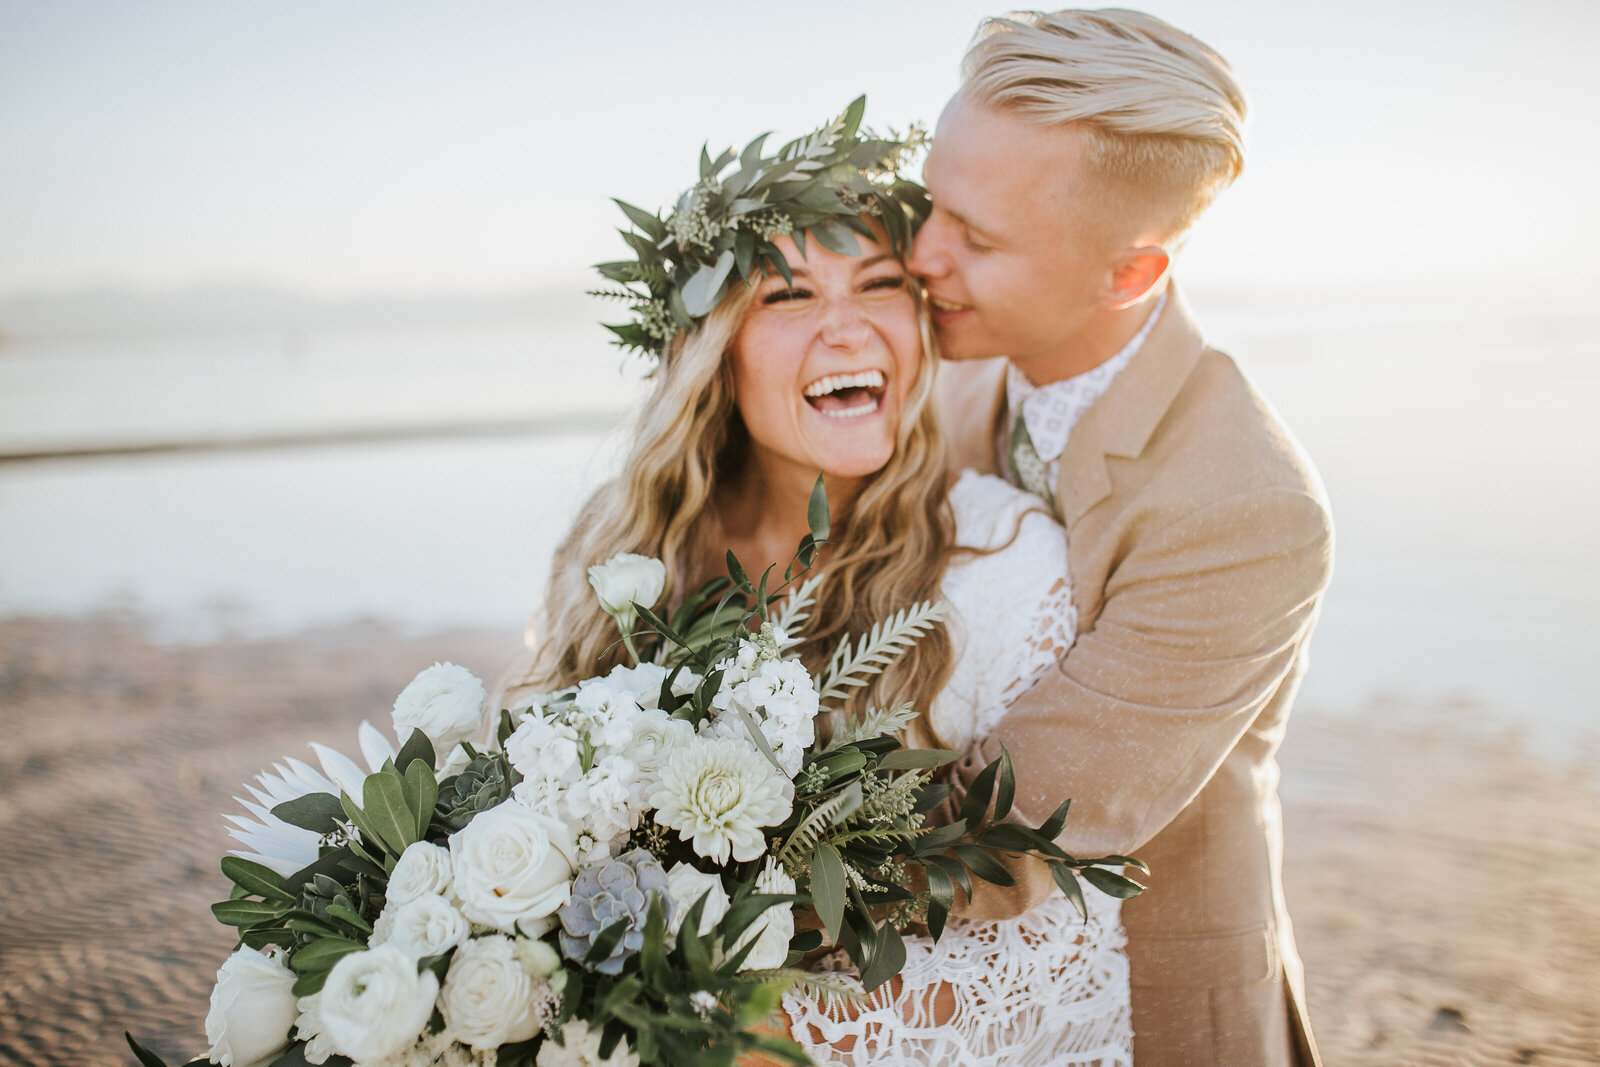 Sacramento Wedding Photographer captures beach wedding with bride wearing floral crown and couple laughing